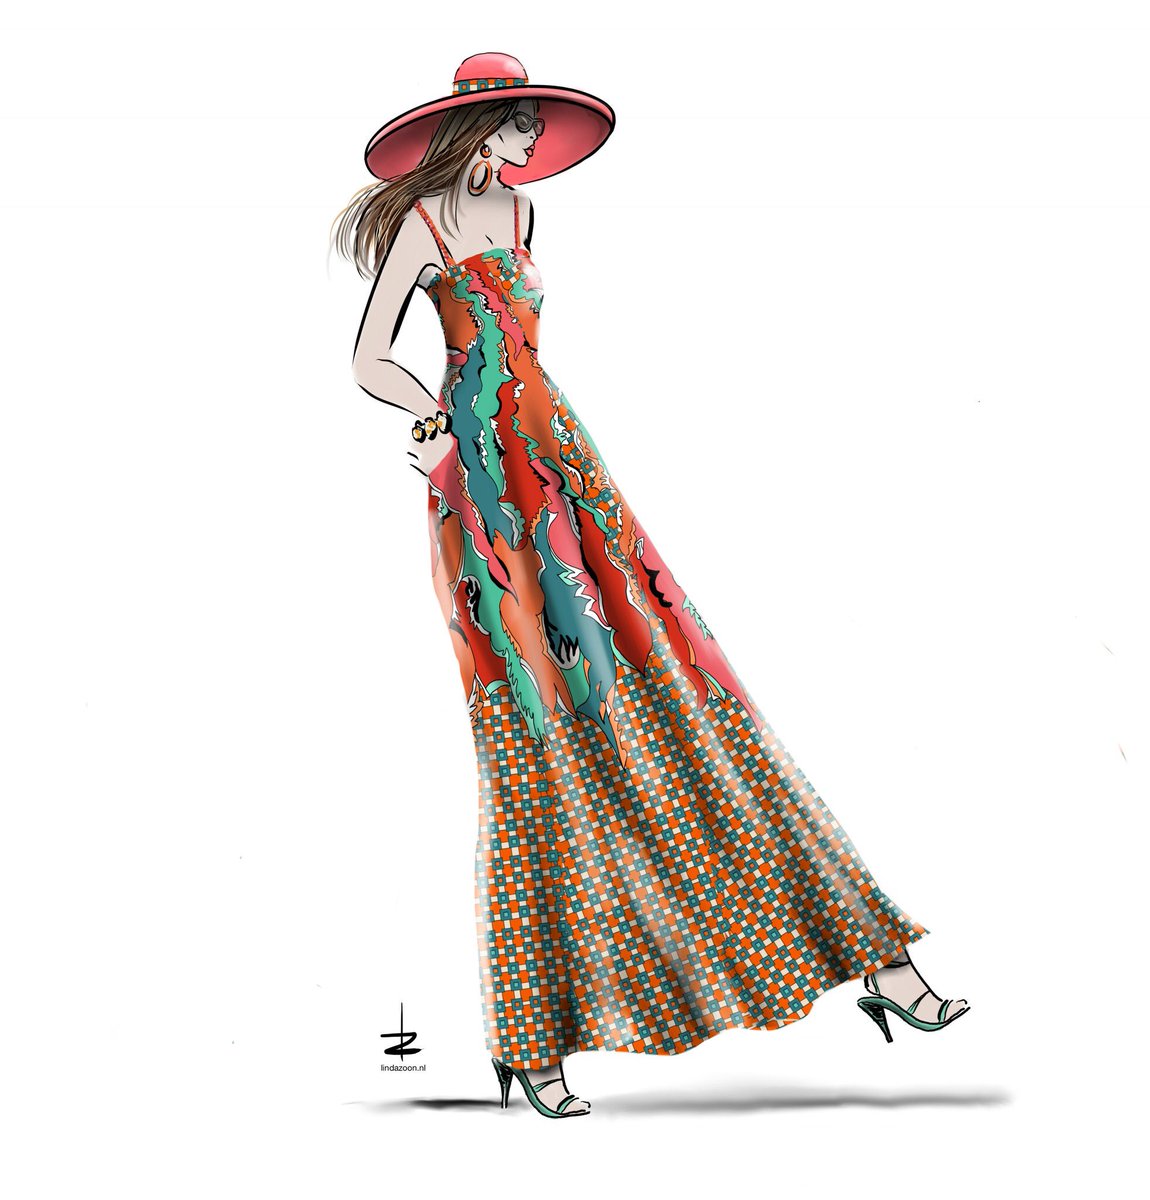 Goodmorning! #summerproof wear your #shades and #summerhat it’s gonna be #tropical today.. 😎🌞 ready for another #summerday #summerinspiration #summerlook #summerdress drawing by #lindazoon #artstudio #hoogstraat #hoogkwartier #rotterdam where art meets #worldoffashion